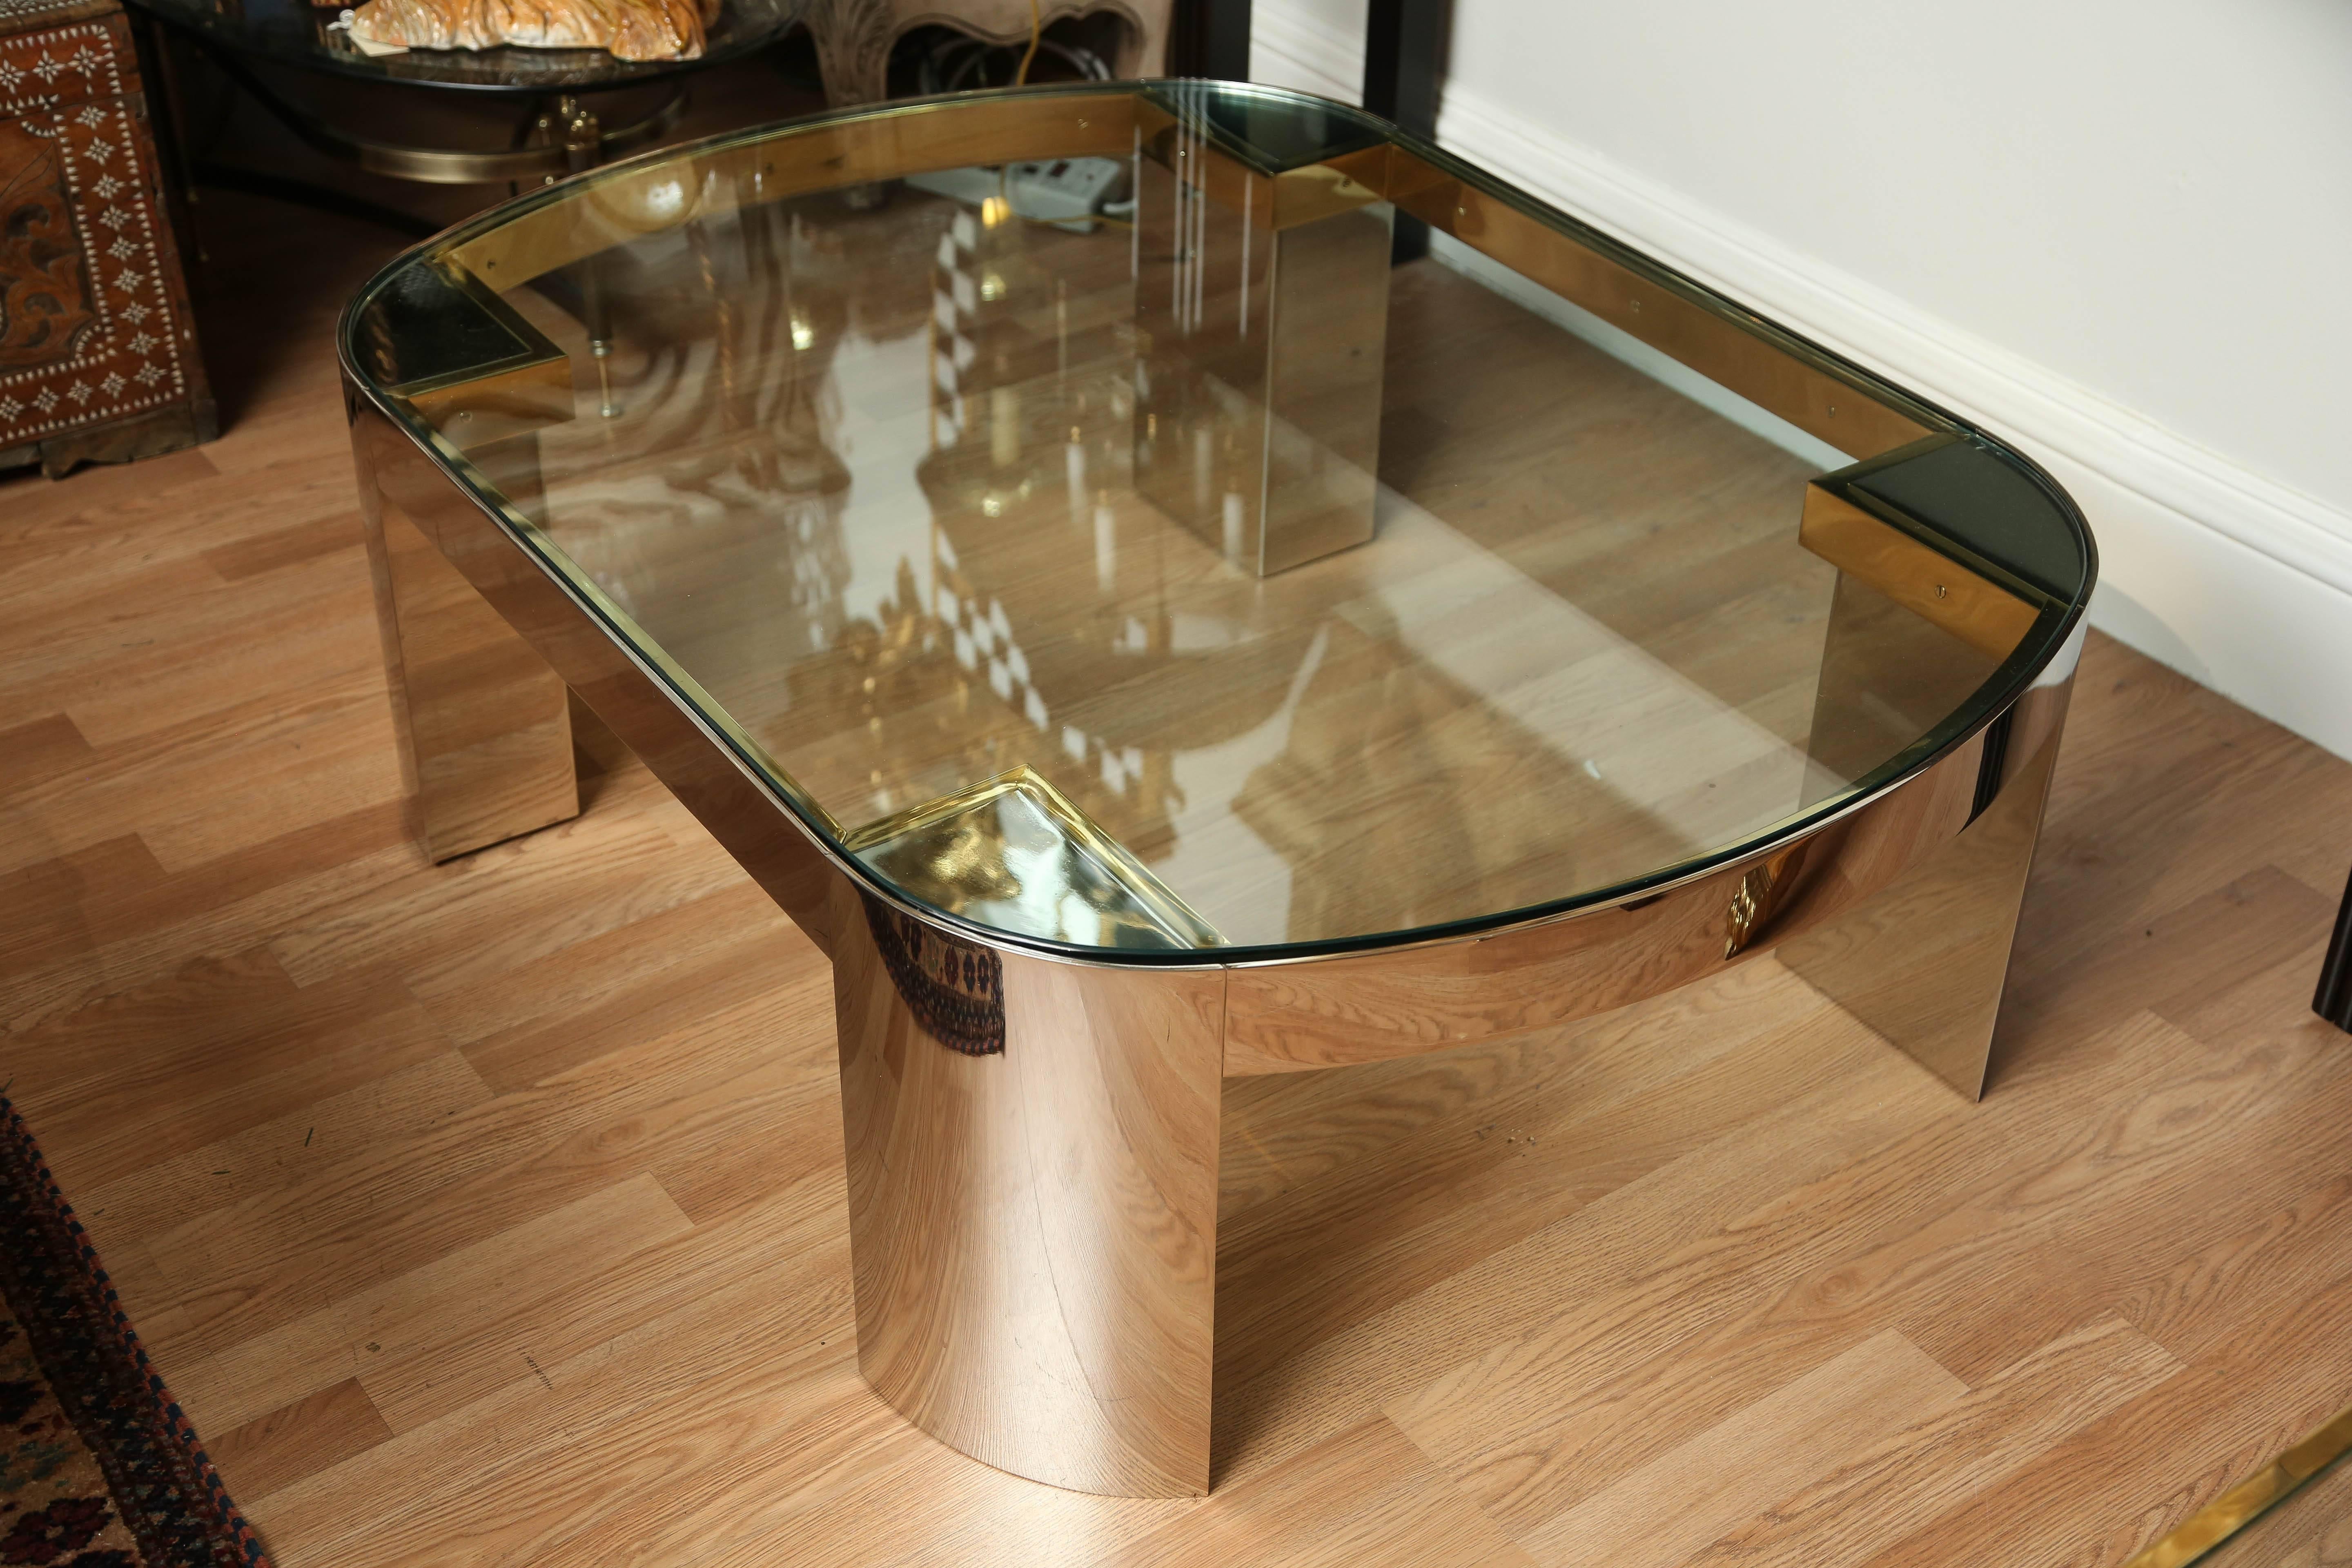 Stunning stainless steel and brass cocktail table with thick glass top by Karl Springer.